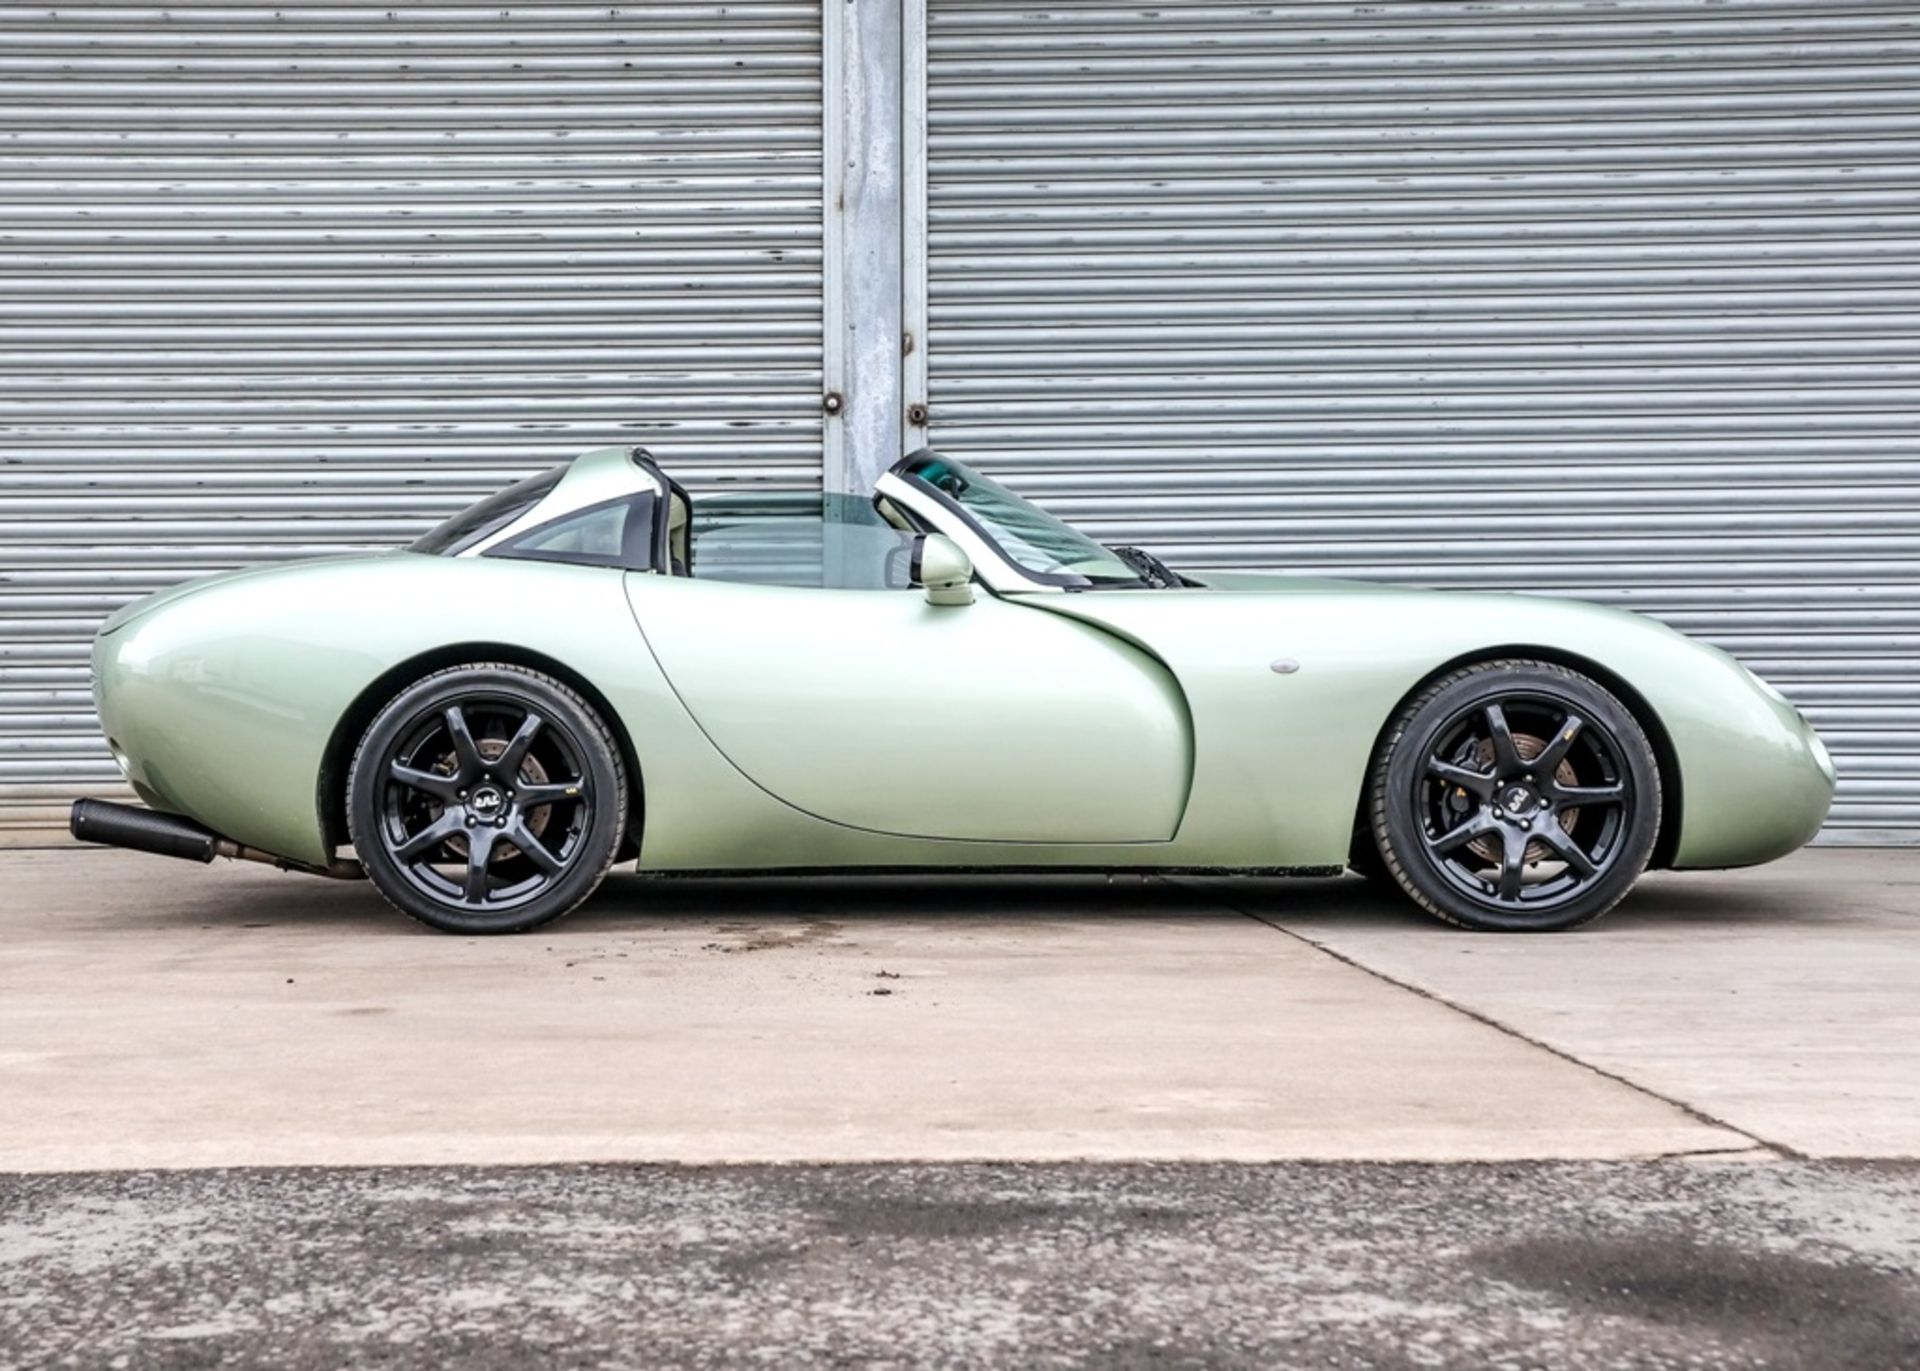 2001 TVR Tuscan Speed Six - Image 2 of 15